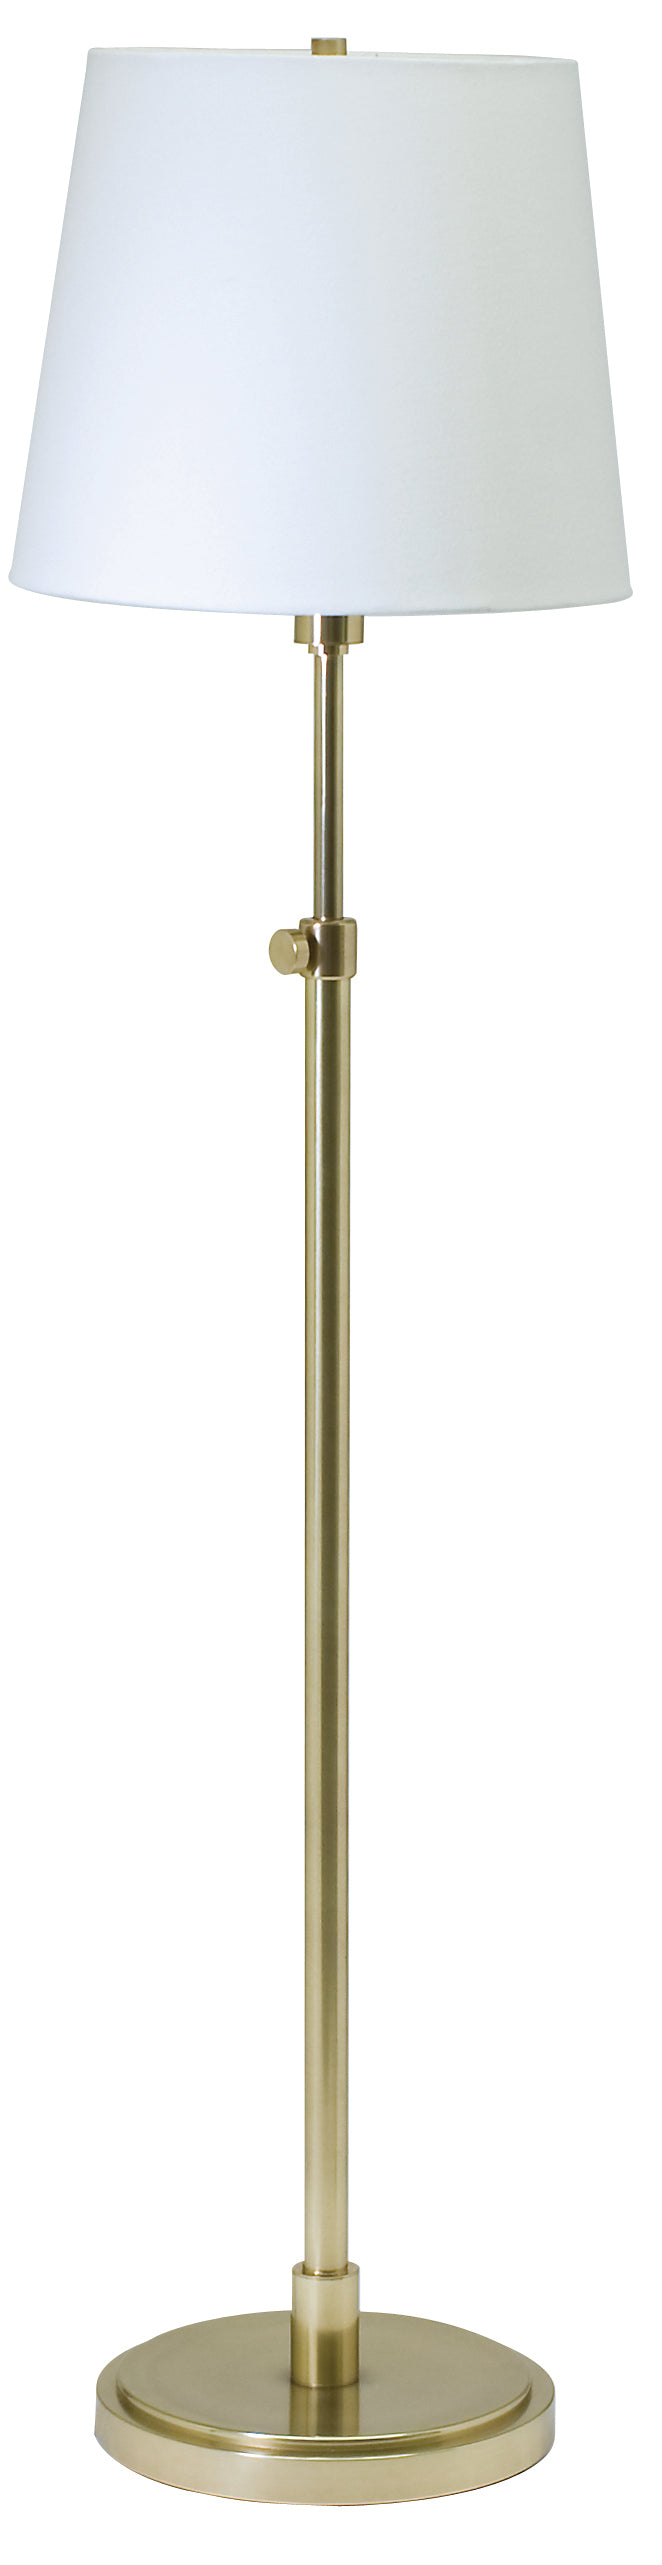 House of Troy Townhouse Adjustable Floor Lamp in Raw Brass TH701-RB